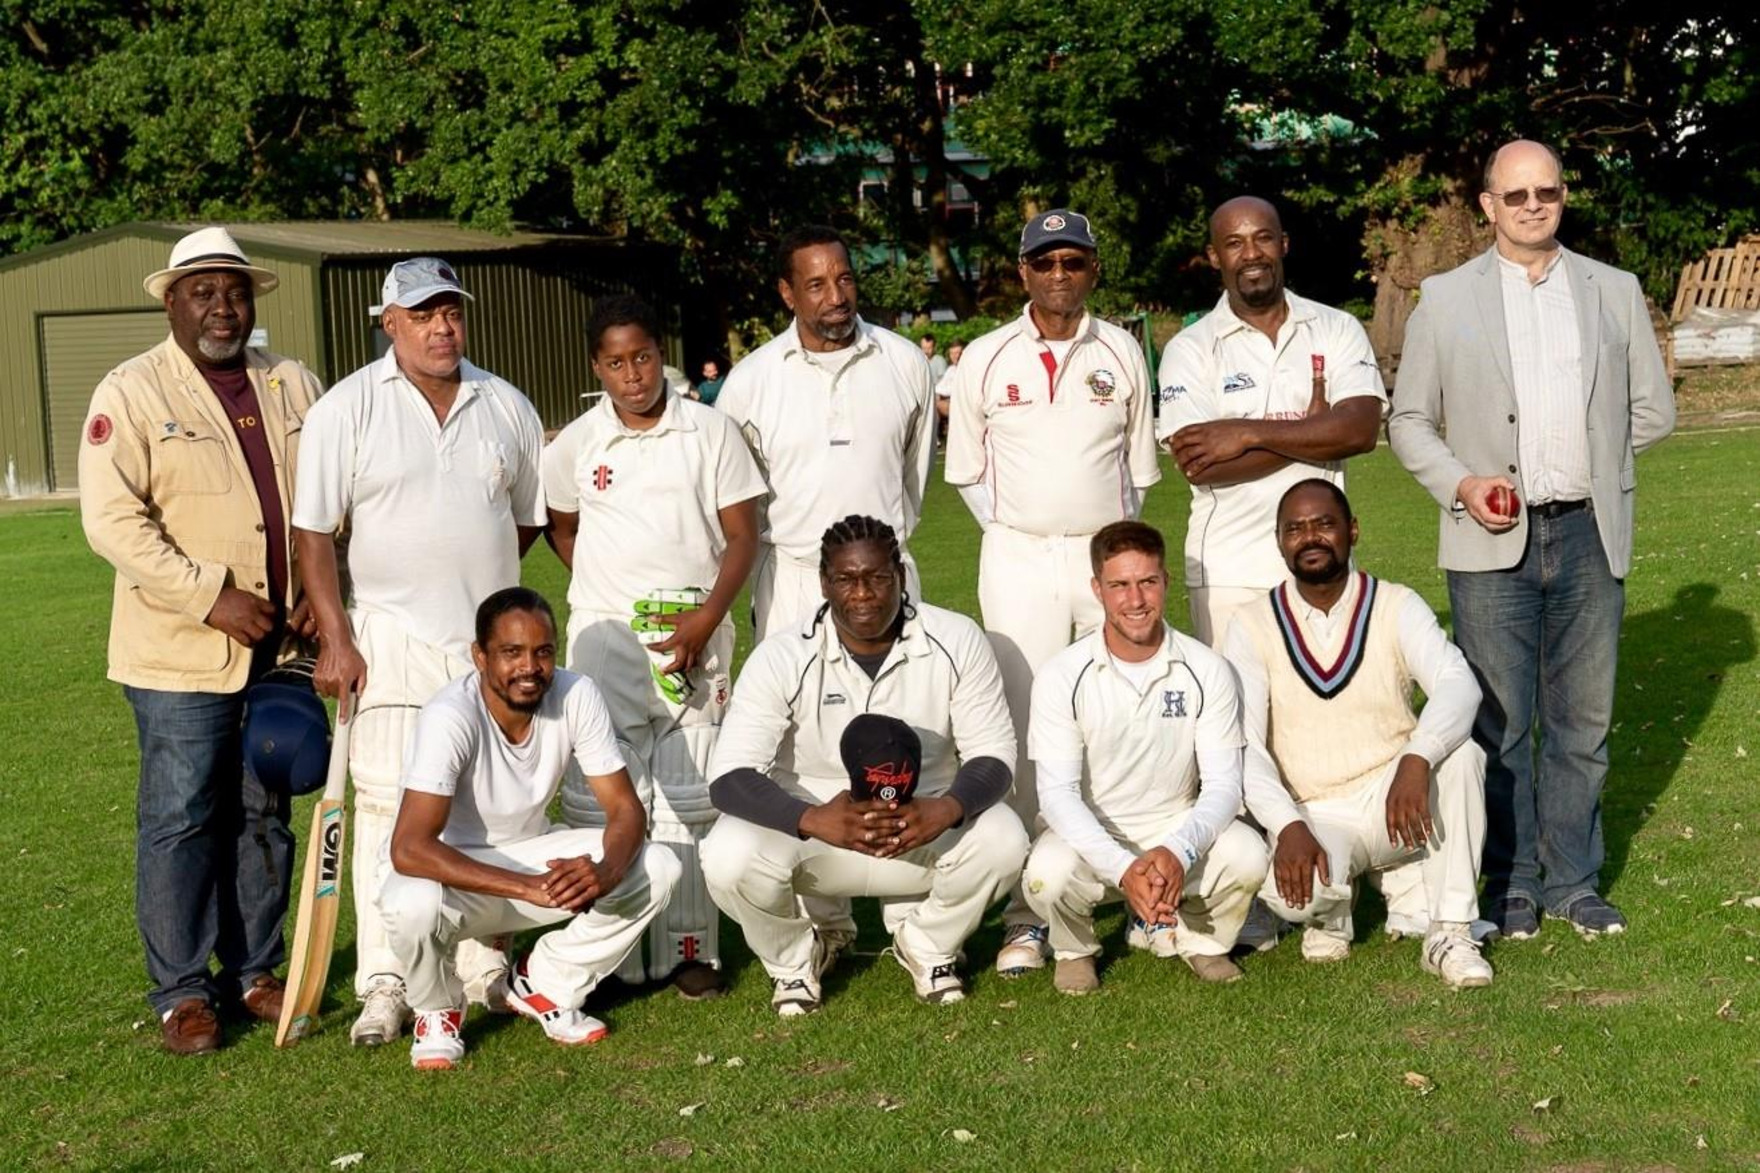 Looking back at the history of the Metropolitan Cricket Association